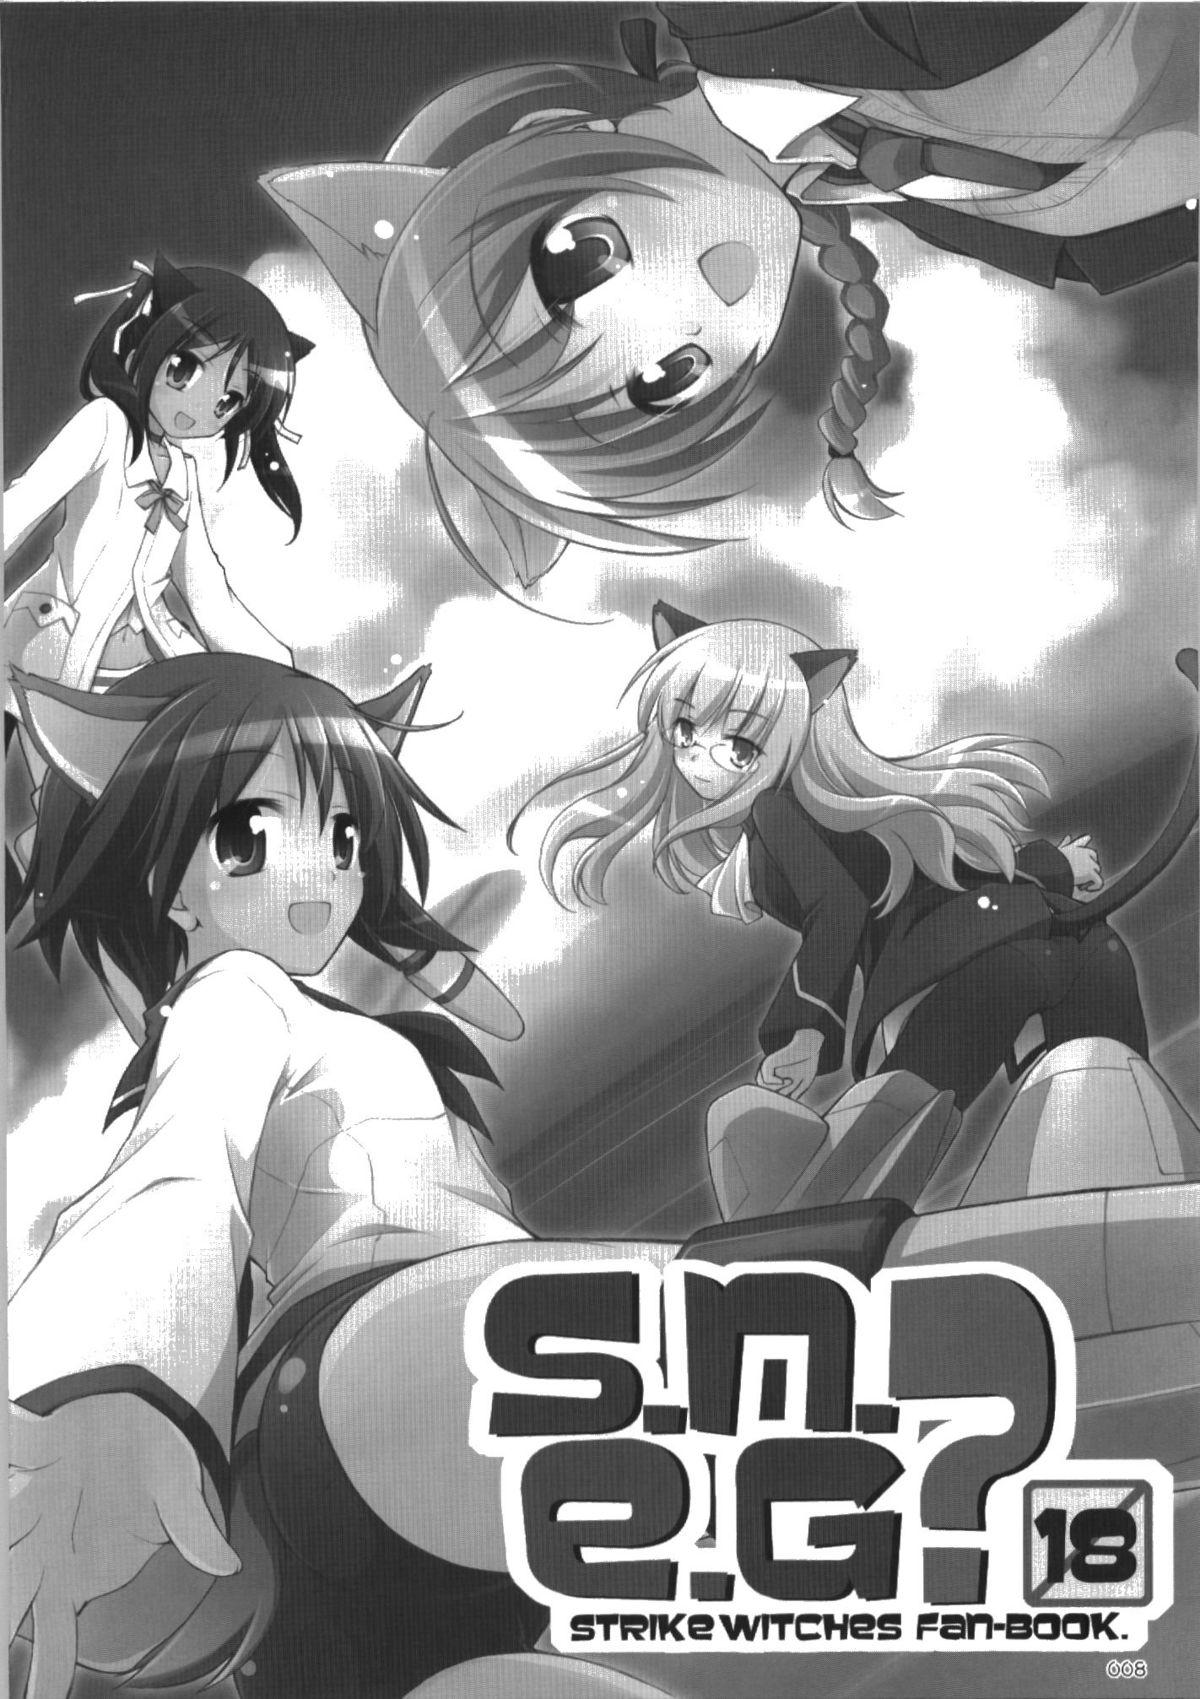 Teen Hardcore s.n.e.g? - Strike witches Anal Gape - Page 8